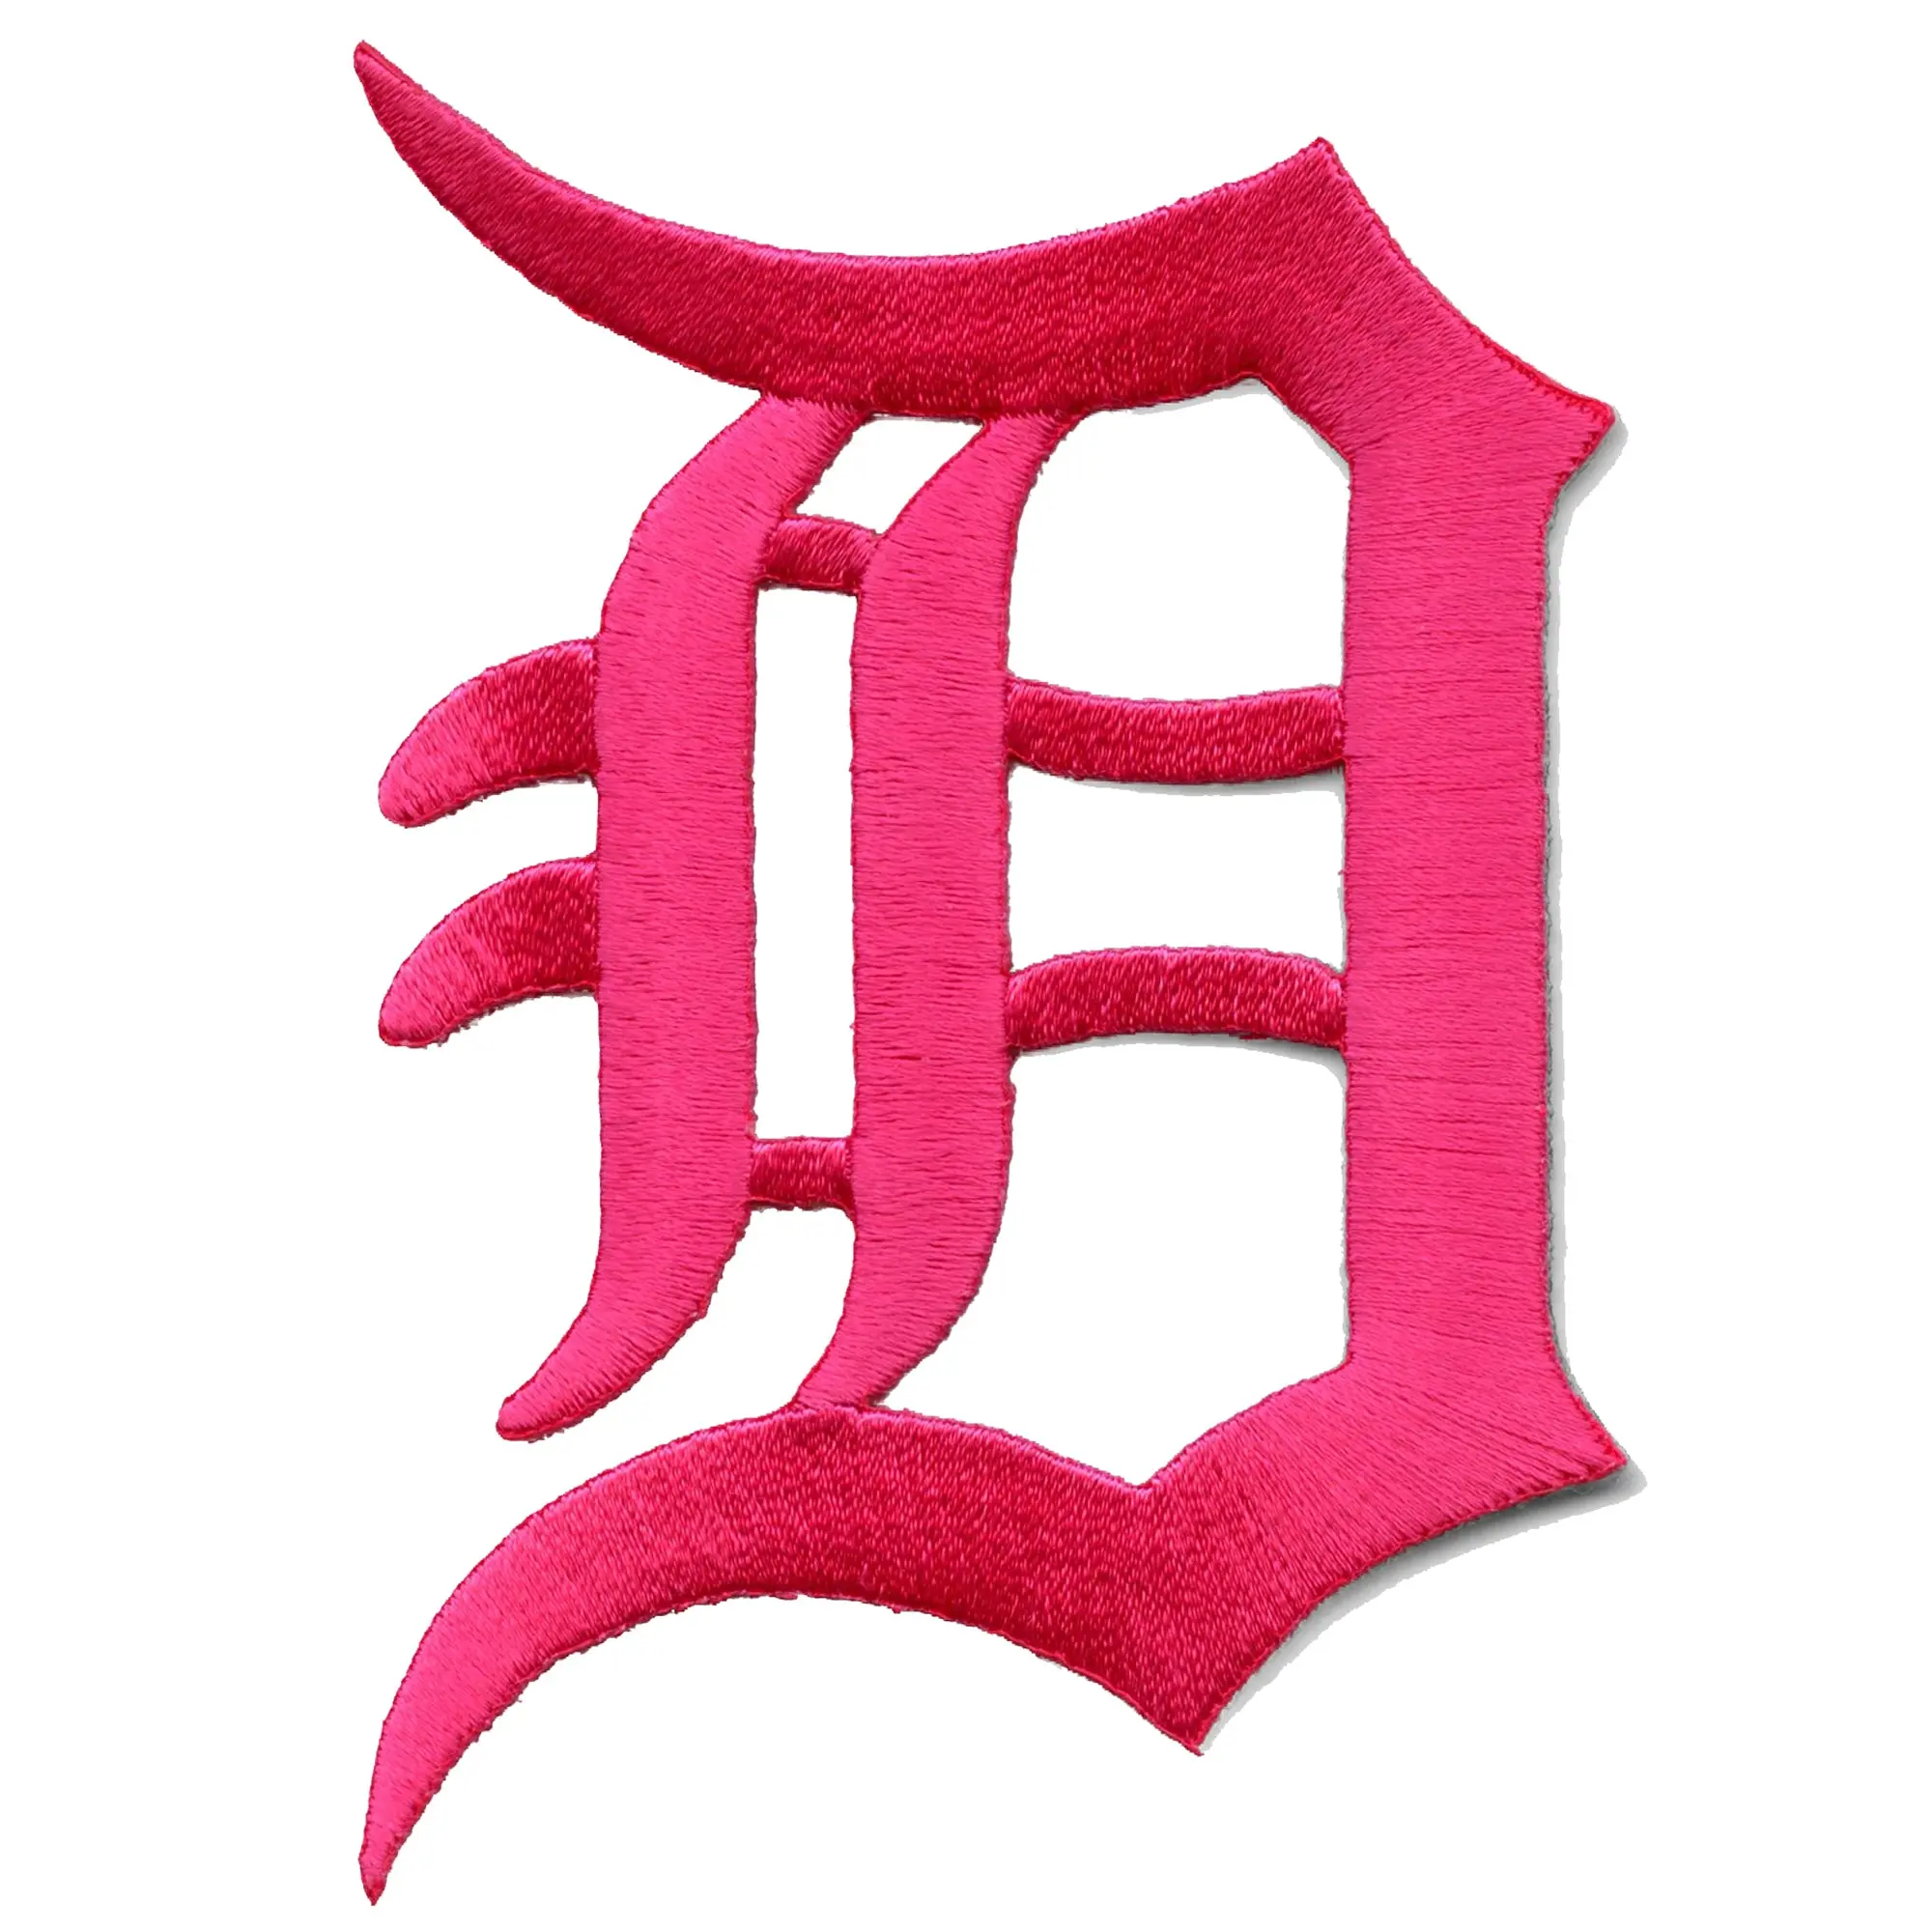 detroit tigers mother's day jersey